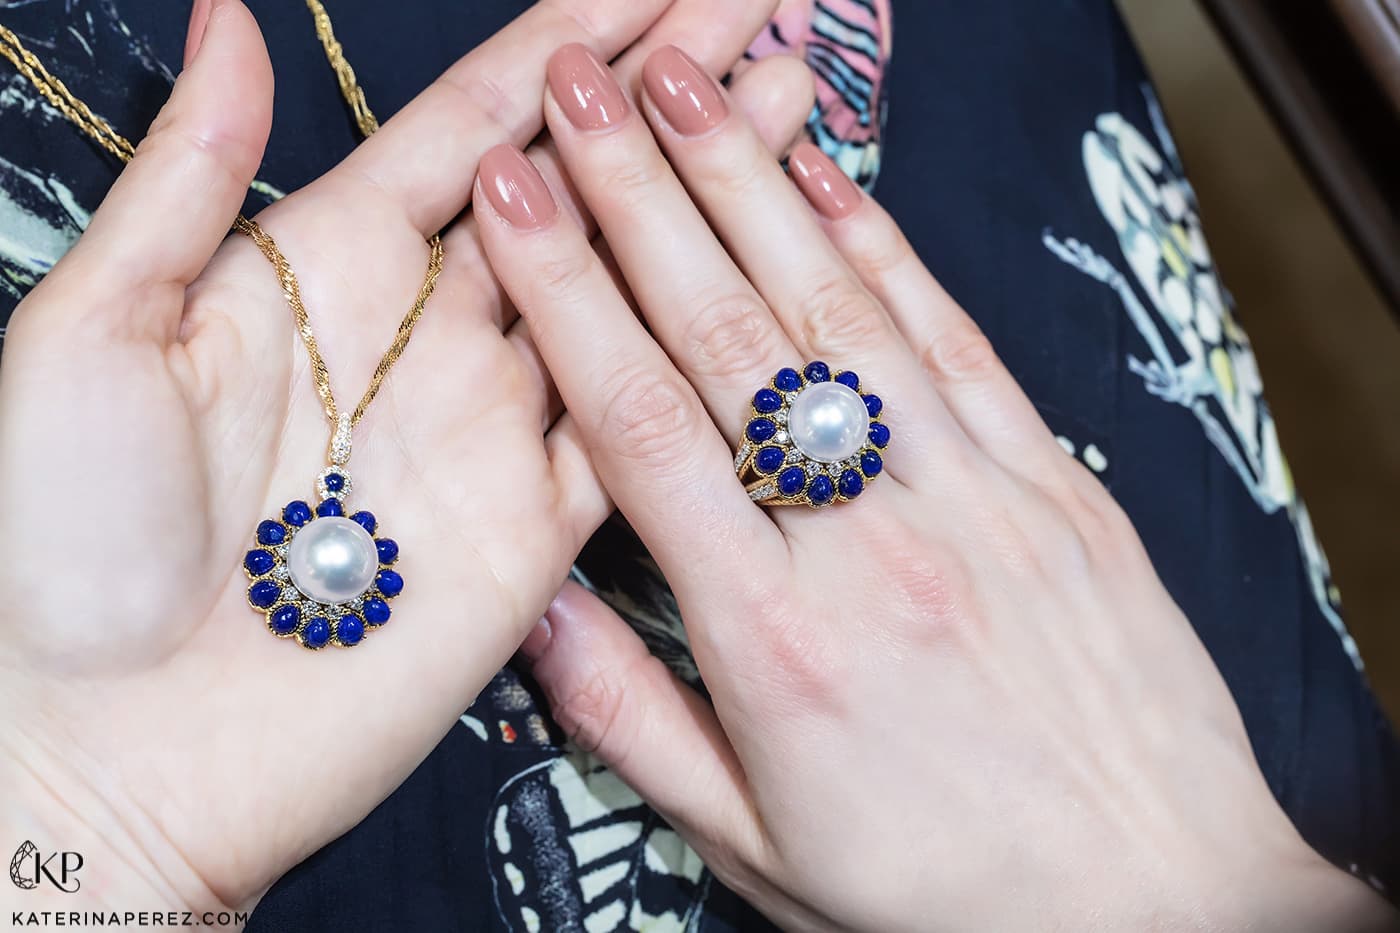 Autore 'Mediterranean' collection pendant necklace and ring with diamonds, South Sea pearls and lapis lazuli in 18k yellow gold